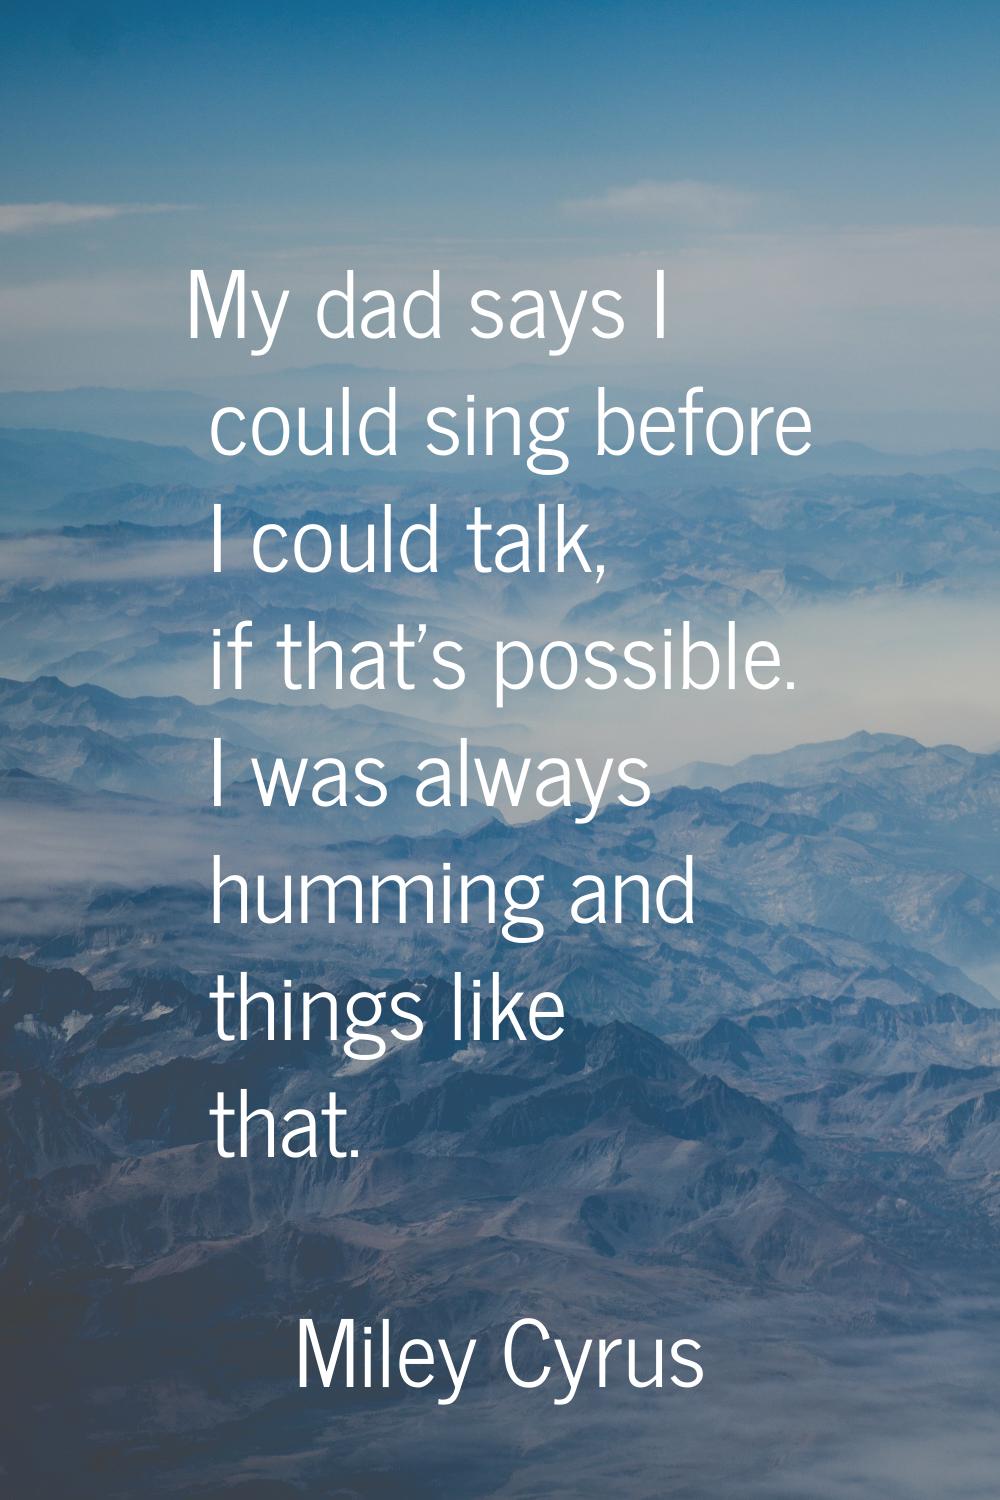 My dad says I could sing before I could talk, if that's possible. I was always humming and things l